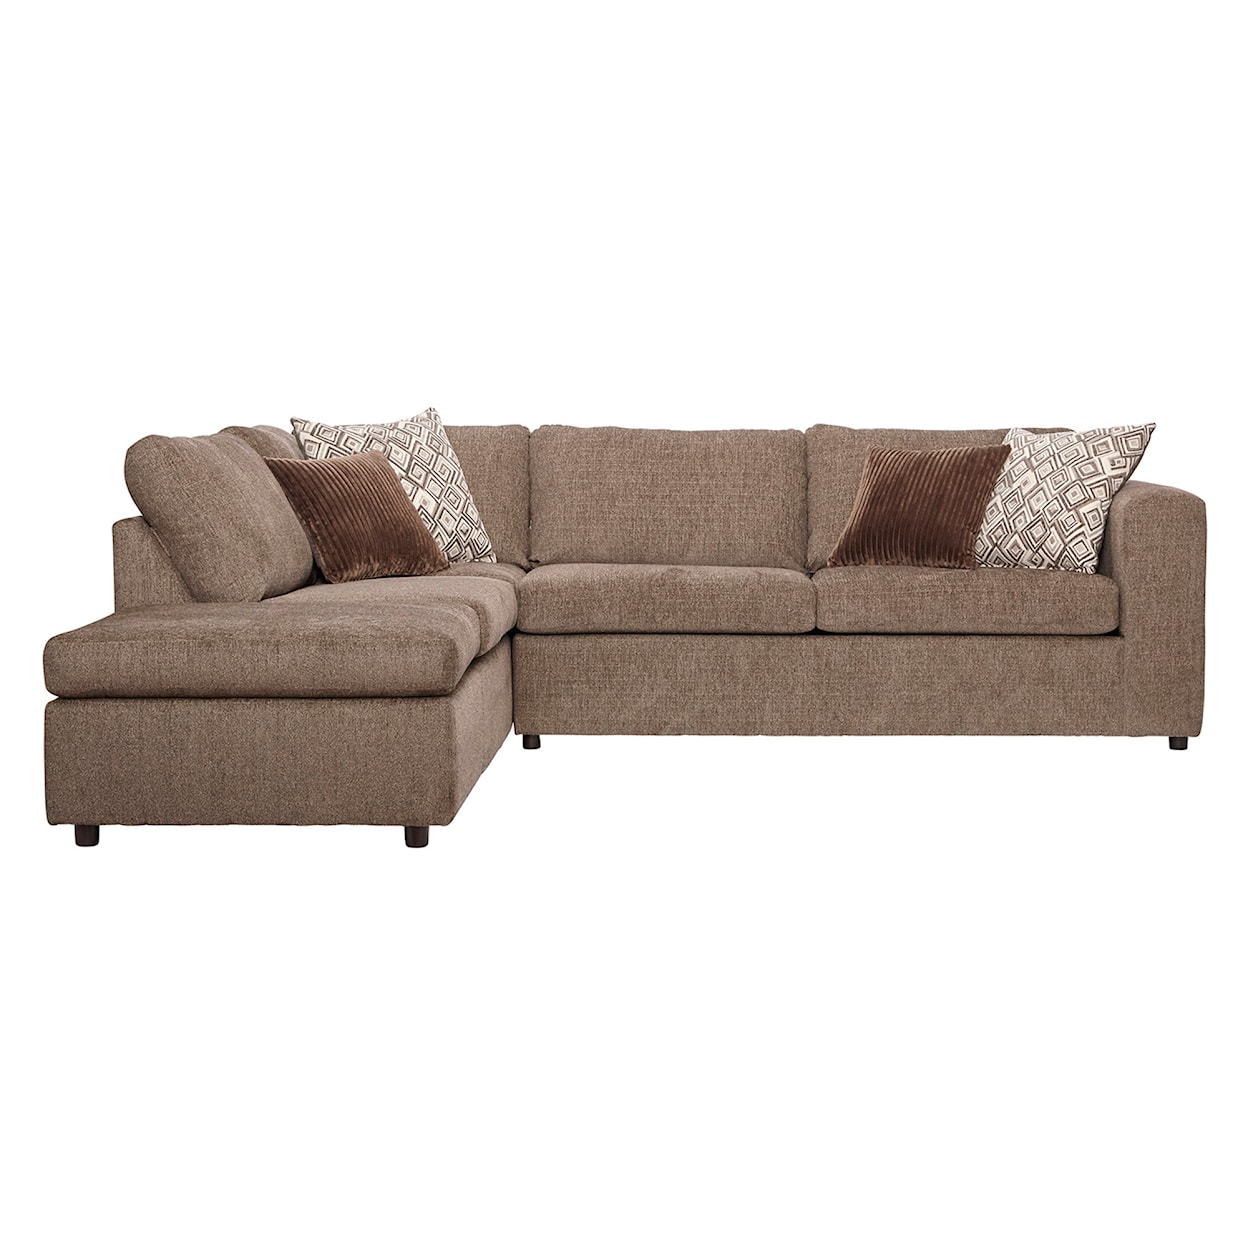 Serta Upholstery by Hughes Furniture 1100 Sectional Sofa with Chaise